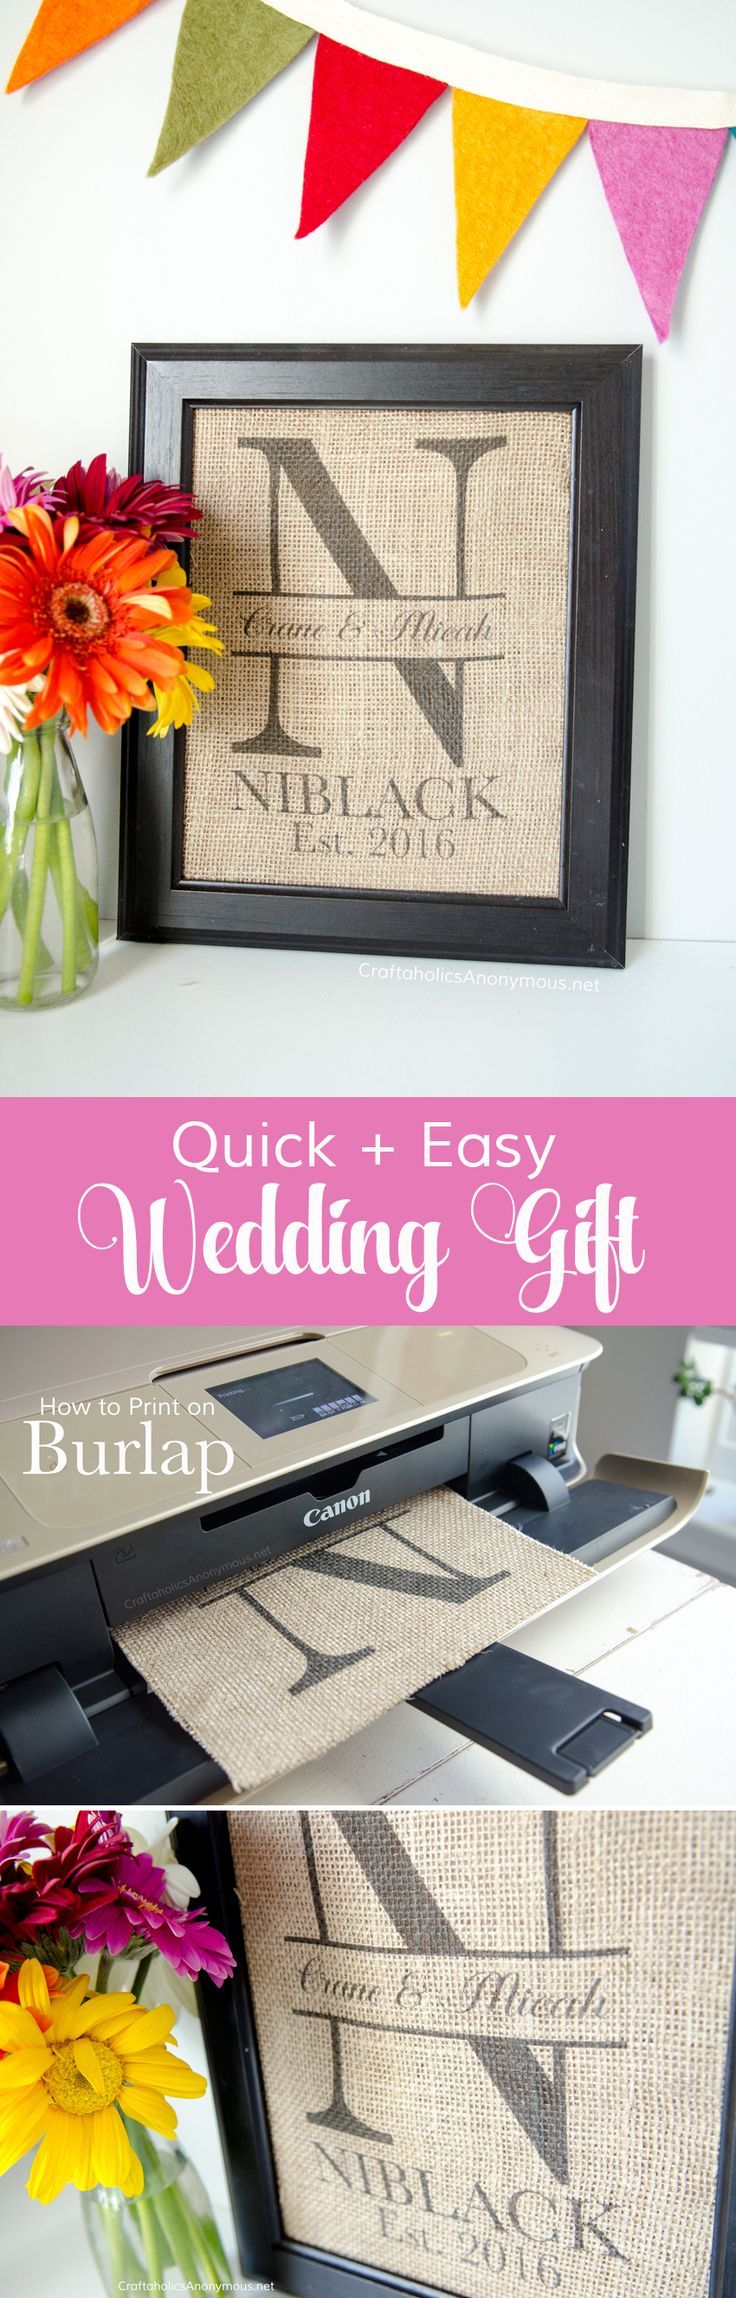 This decor makes the best DIY art for a wedding, or nursery...the ideas are endl...